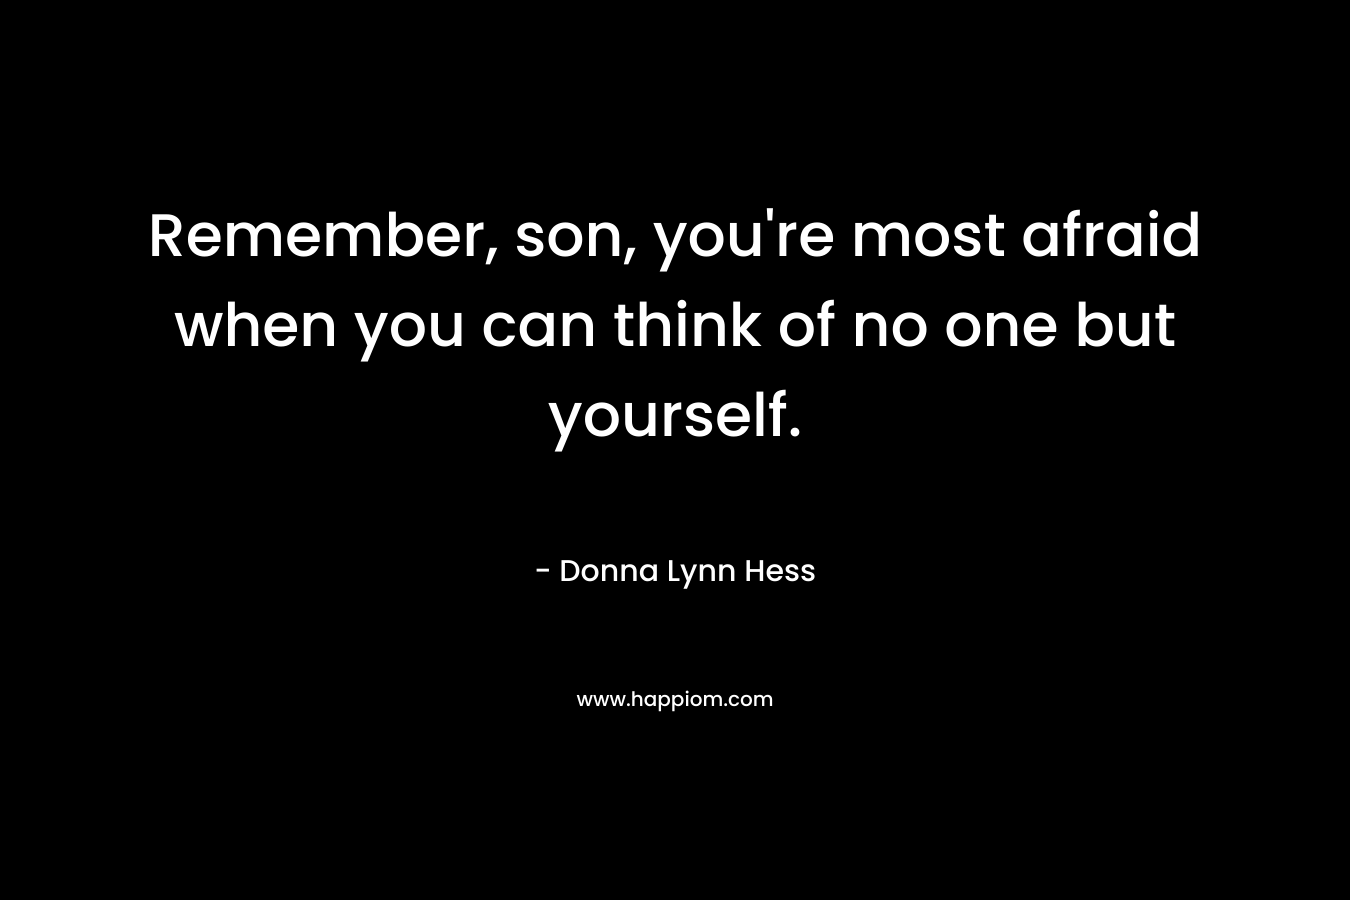 Remember, son, you’re most afraid when you can think of no one but yourself. – Donna Lynn Hess